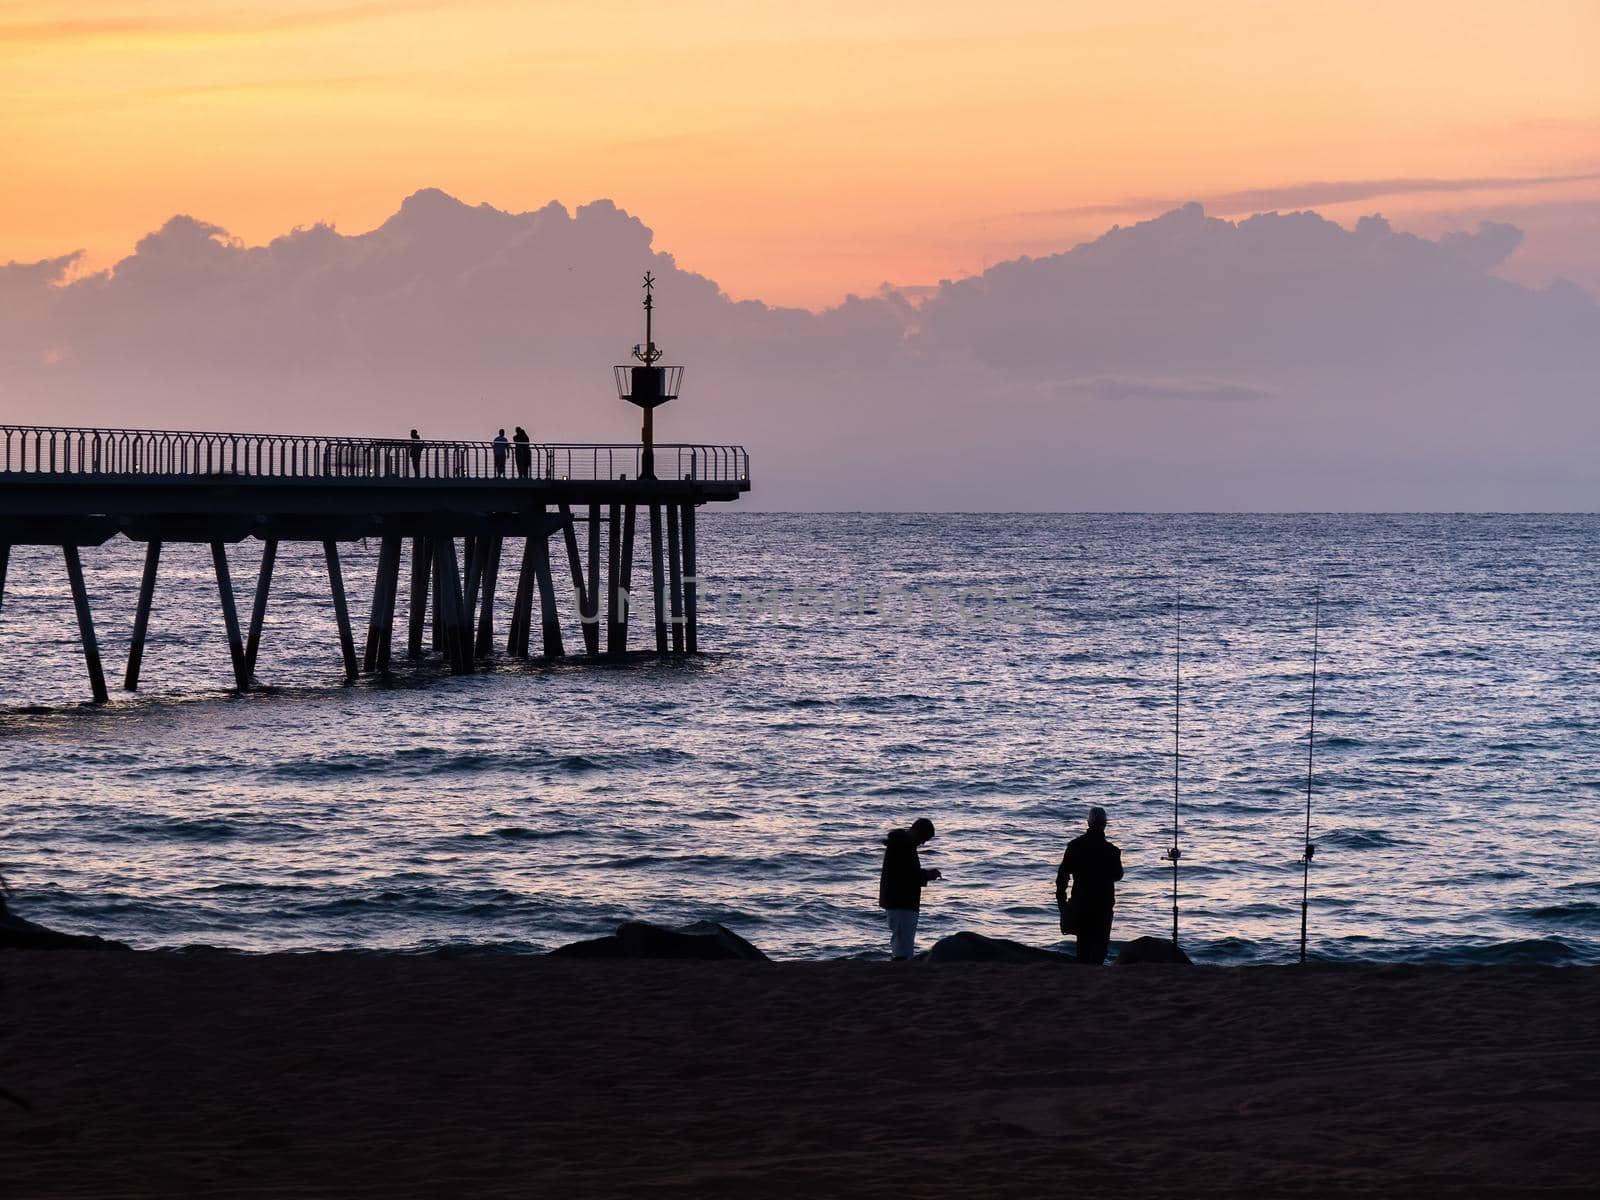 Two fishermen are fishing on beach at the sunset using fishing rods, set against the coast. Pontoon, orange sky and clouds at the background. Badalona, Barcelona, Spain